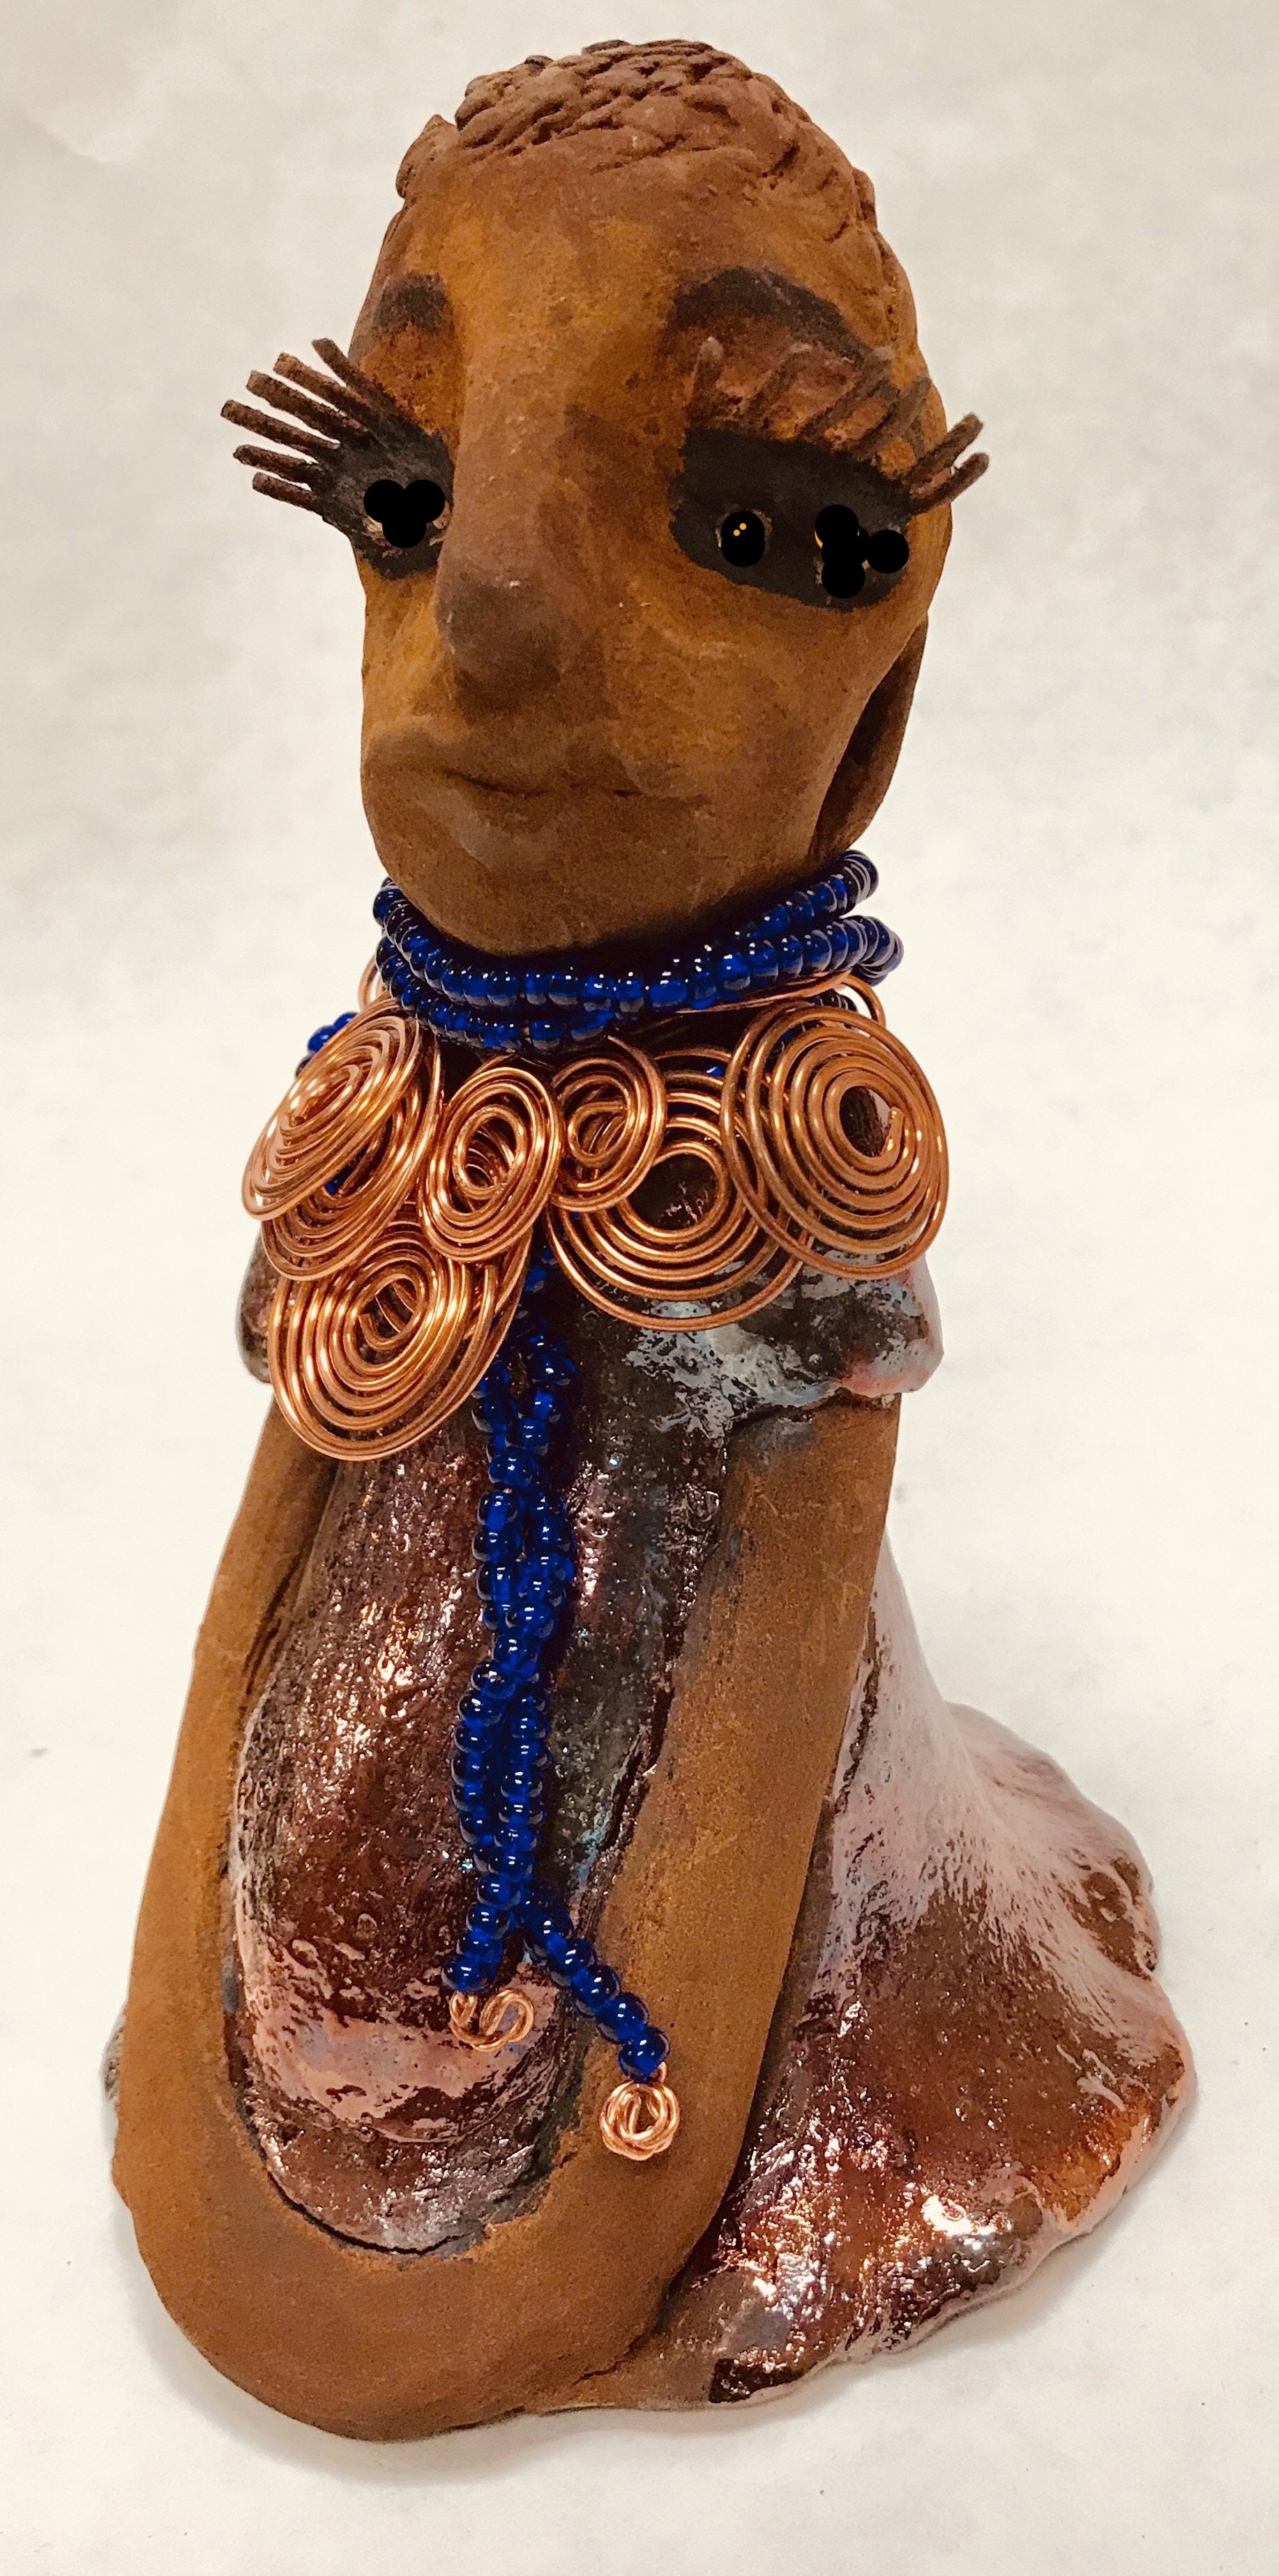 Tattayana stands 8" x 4.5" x 5" and weighs 1.02  lbs. She has a lovely honey brown complexion with reddish brTattayanaown lips. She has a short braided hairstyle.  Tattayana has a colorful metallic antique copper glazed dress. She wears spiral copper wire necklaces on top of an aqua blue beaded collar.  Tattayana has her long loving arms rest at her side. With eyes wide opened,Tattayana  has hopes of finding a new home.